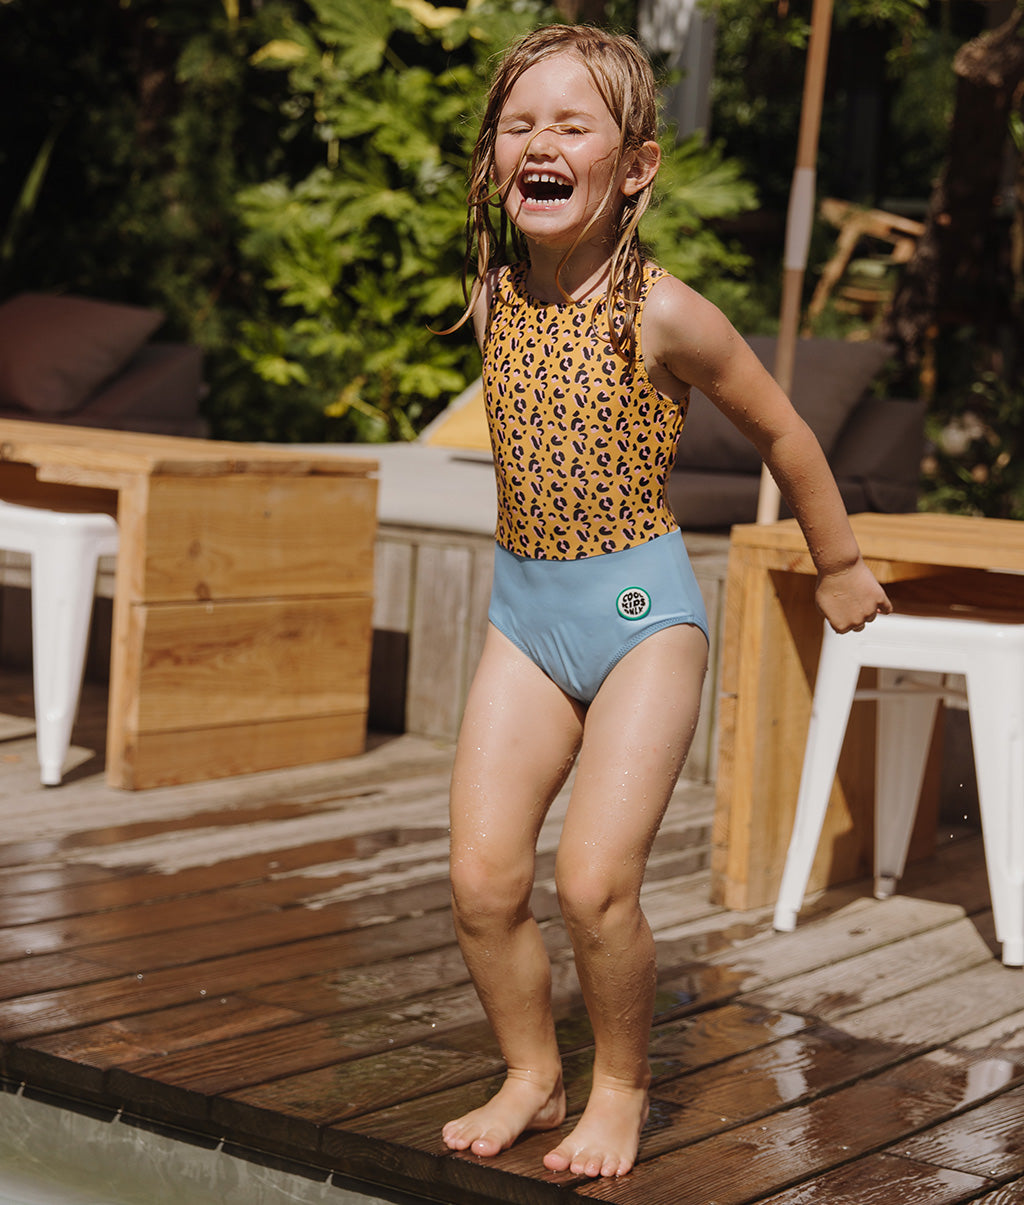 Maillot de Bain Fille Panther anti-uv, une pièce, Cool Kids Only !